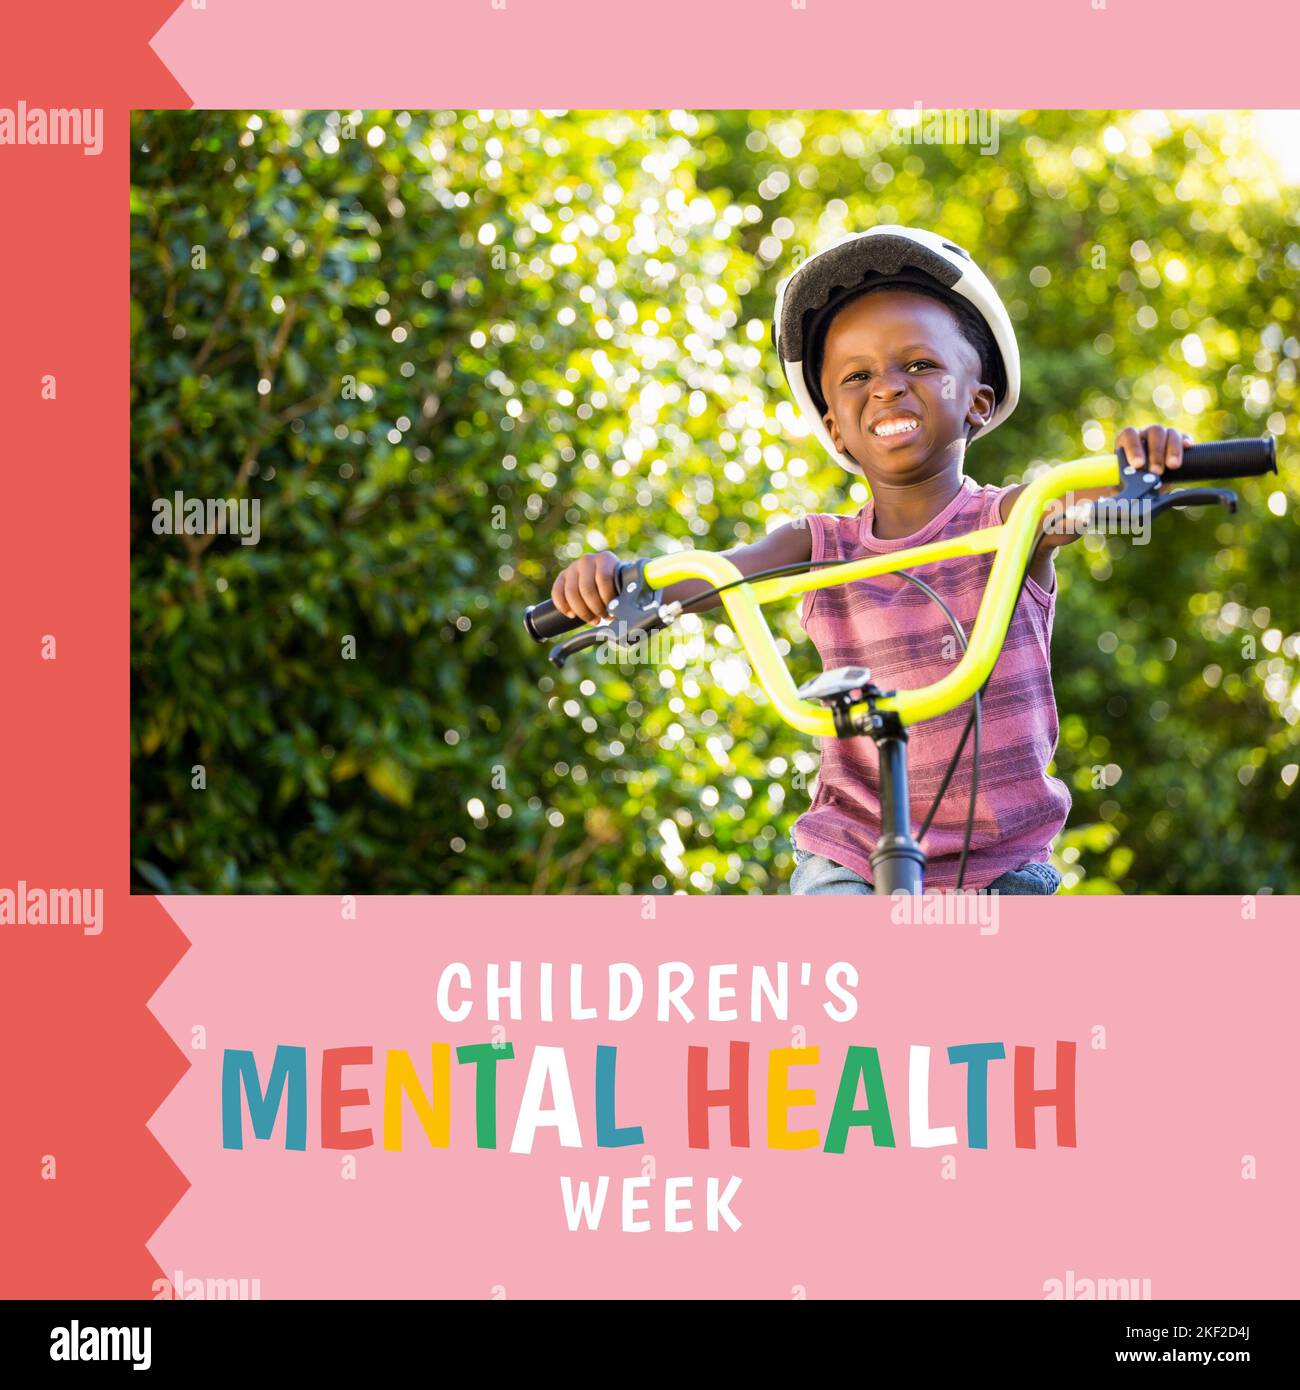 Composition of children's mental health week text and boy on bike Stock Photo